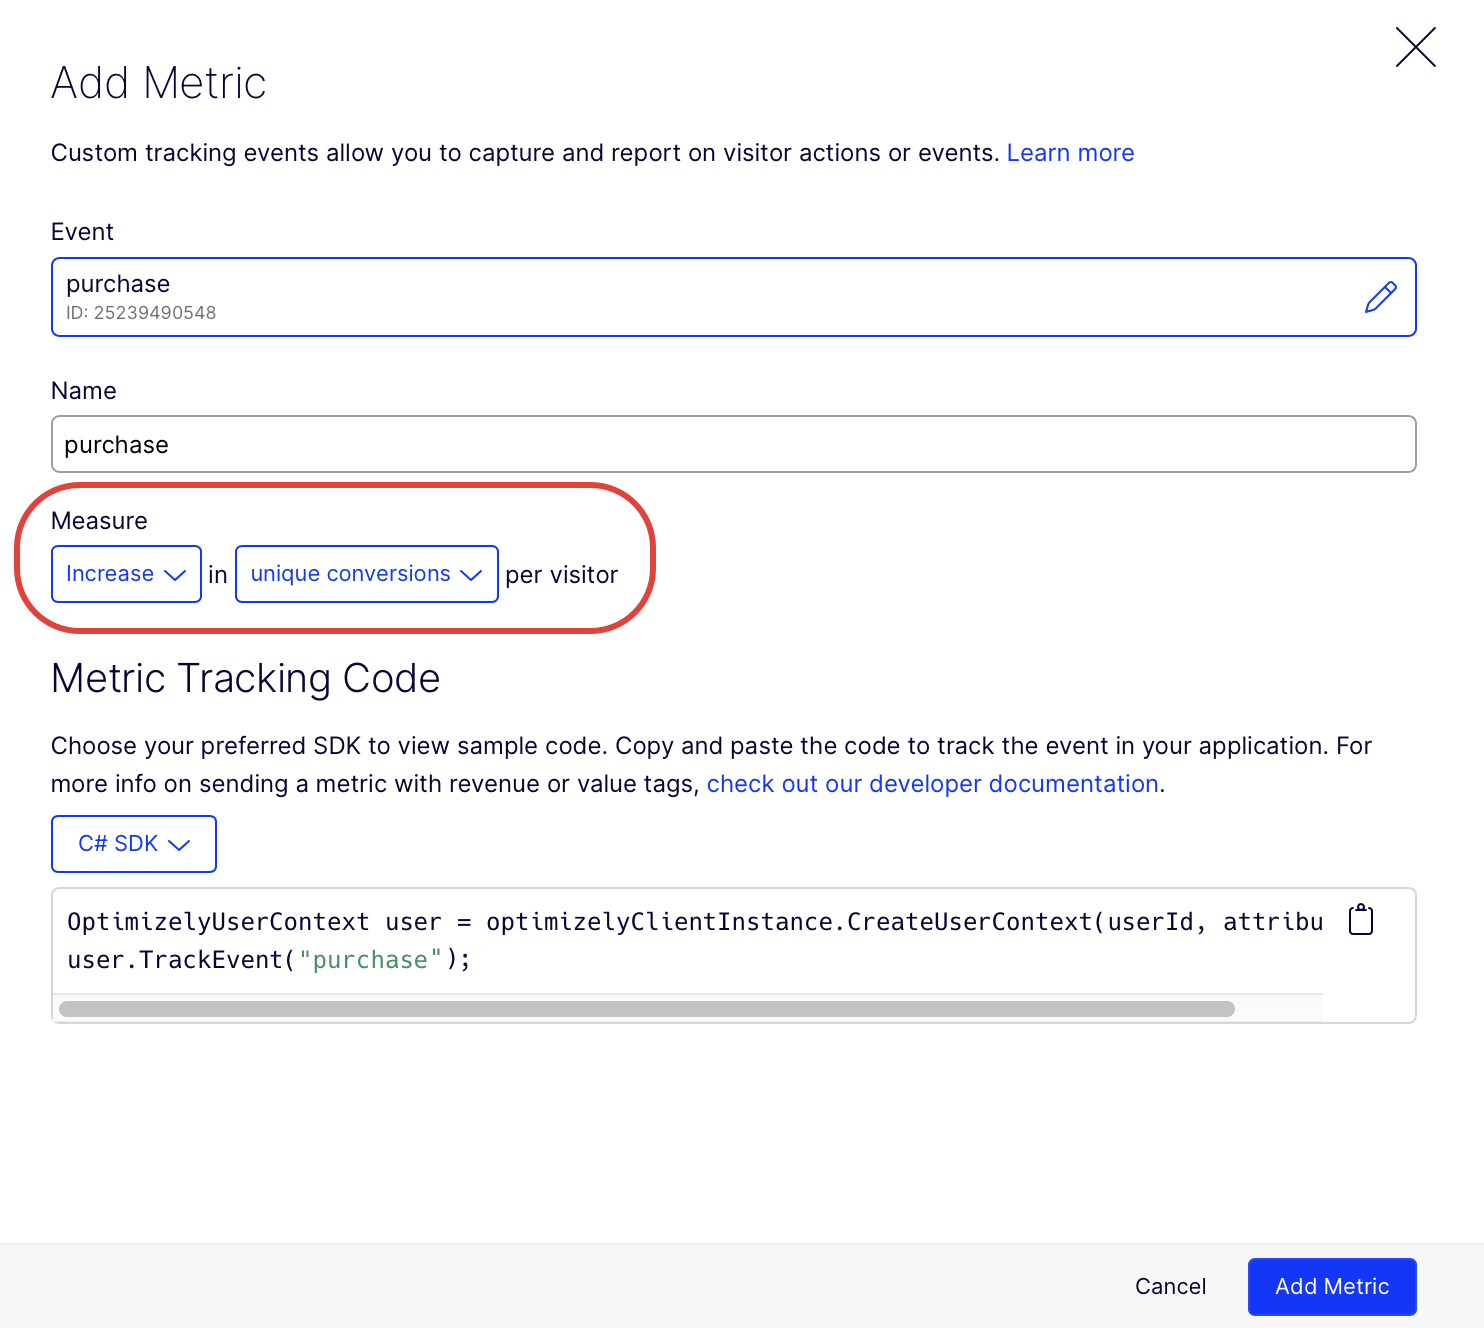 add purchase metric which tracks the increase in unique conversions per visitor